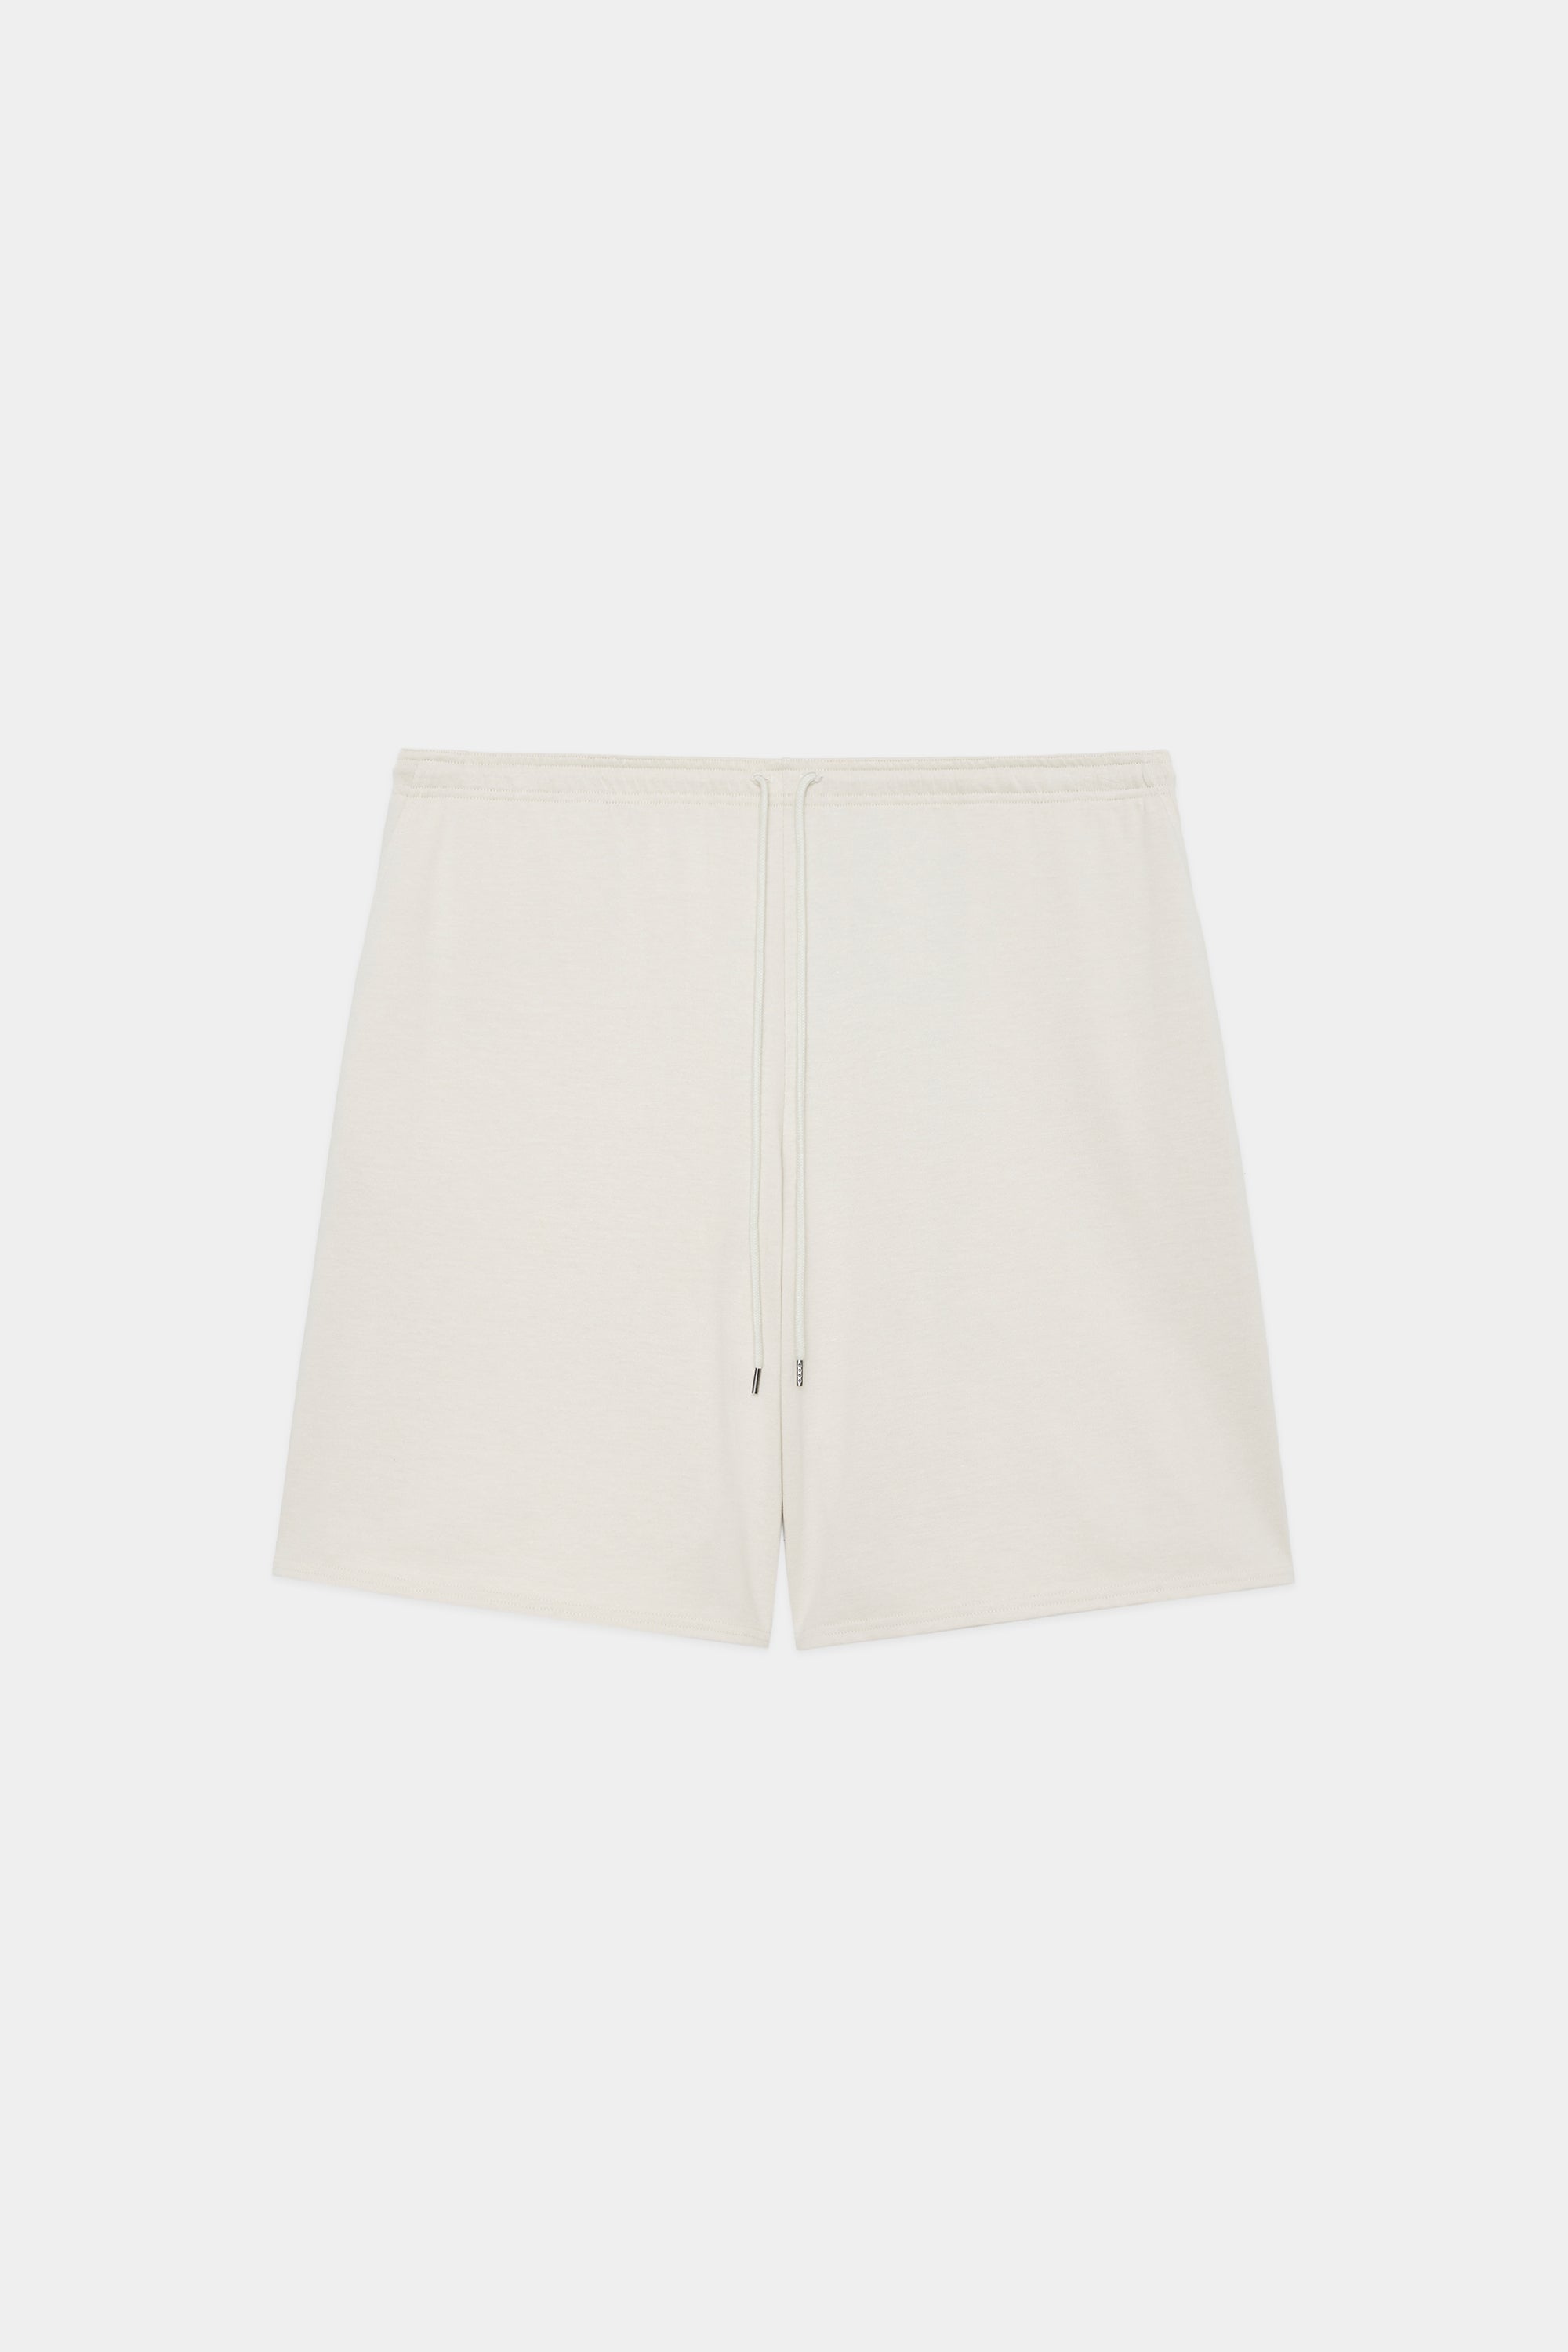 20//1 RECYCLE SUVIN ORGANIC COTTON KNIT EASY SHORTS, Off White